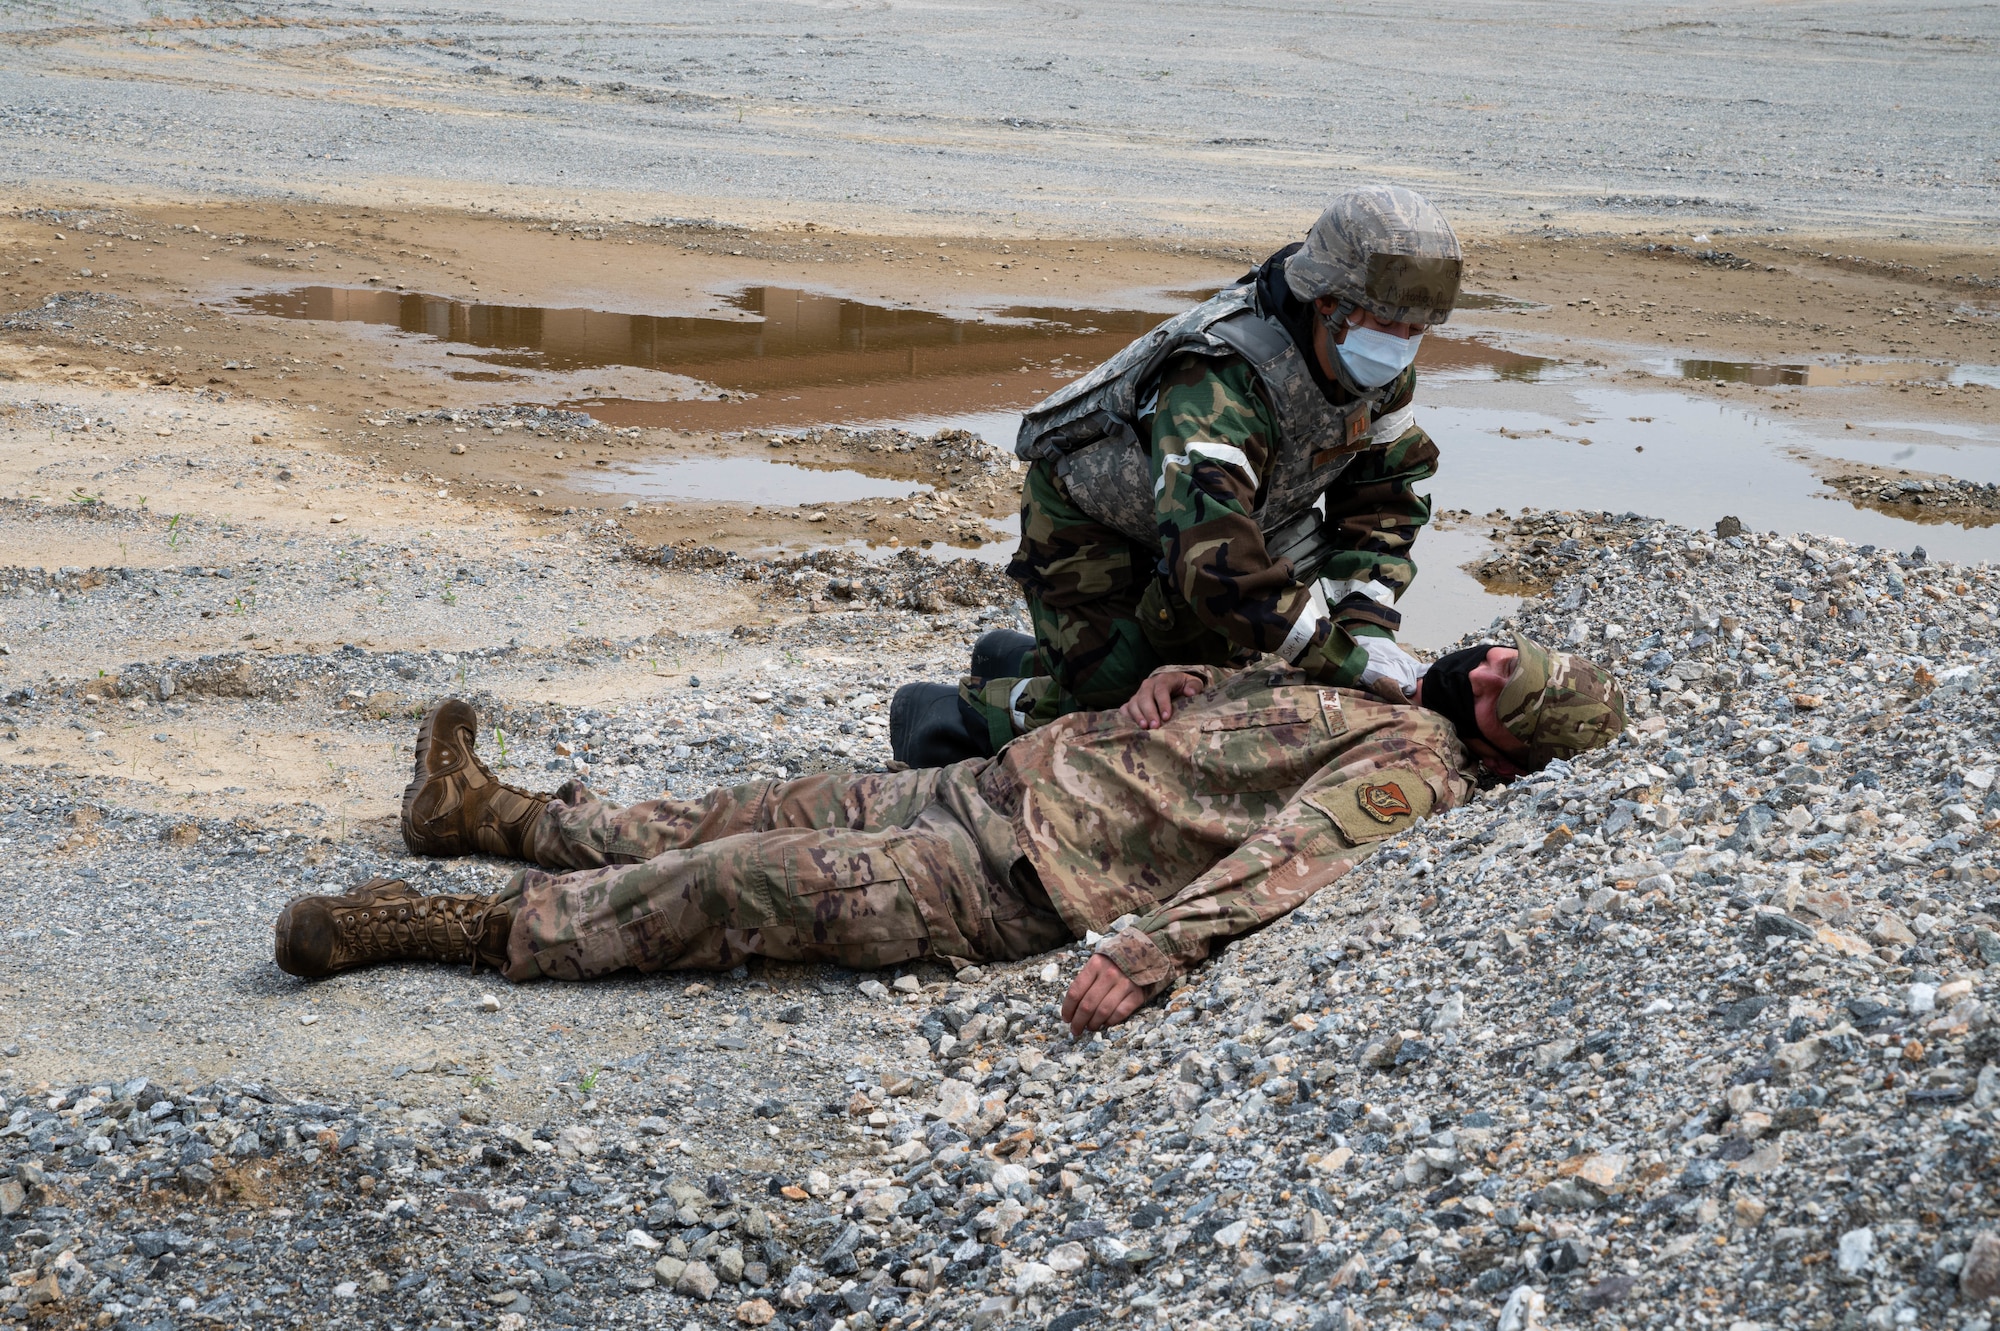 Capt. Danielle Miltenberg from the 51st Medical Group locates a mock deceased member during a mass casualty training event